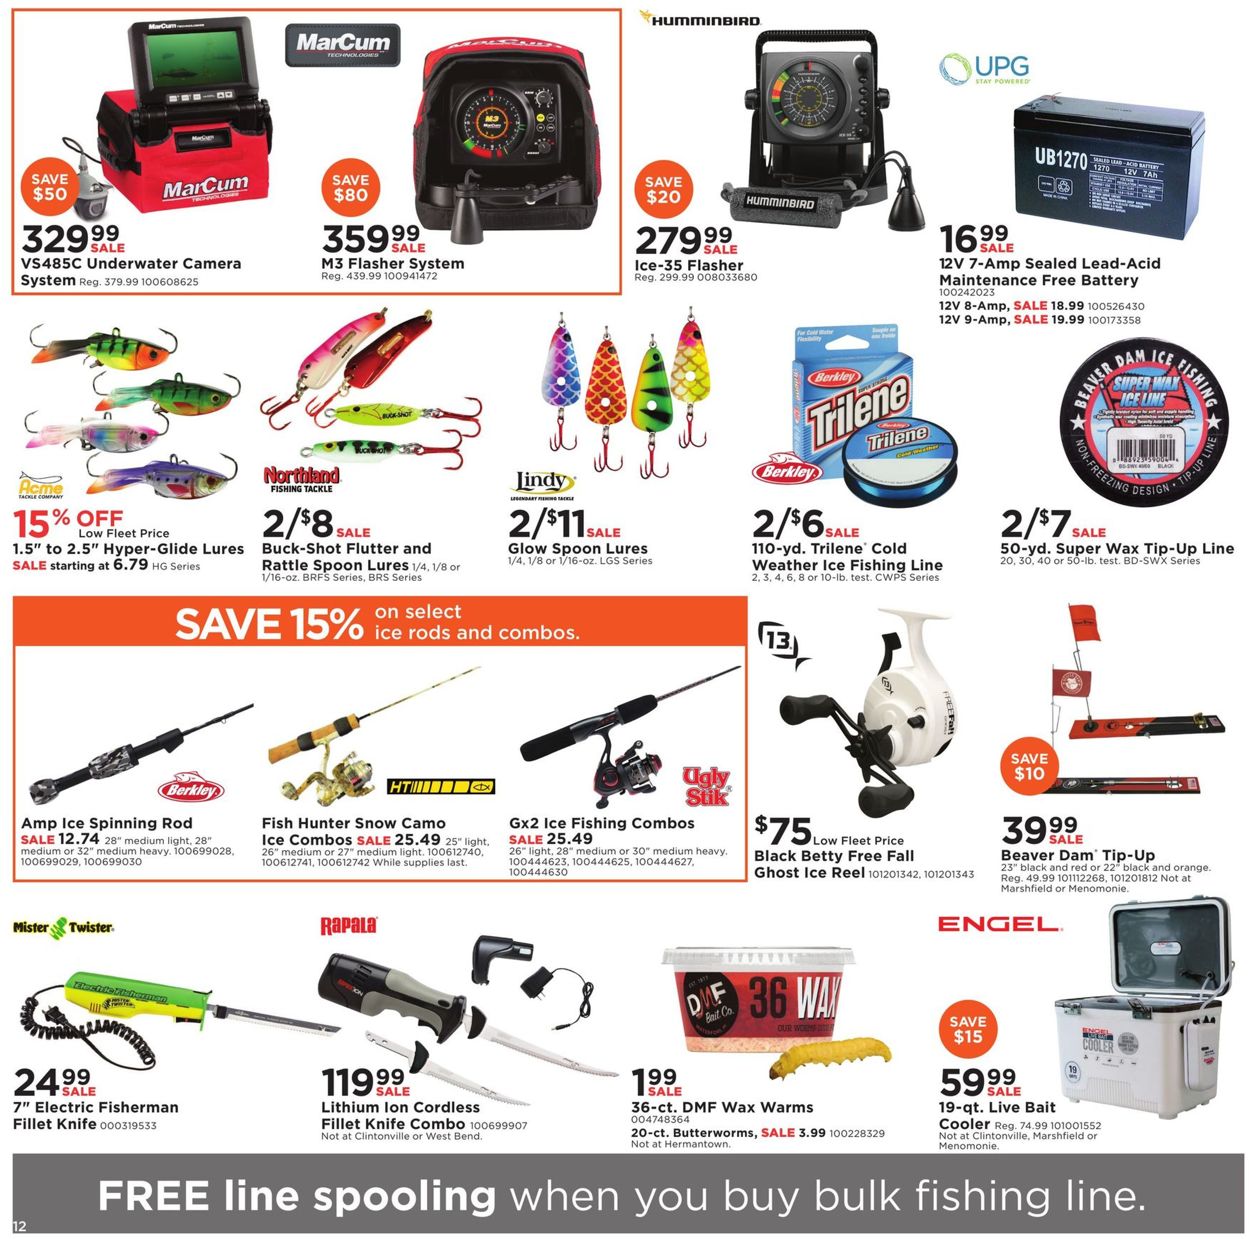 Mills Fleet Farm Current weekly ad 12/27 - 01/04/2020 [12] - frequent ...